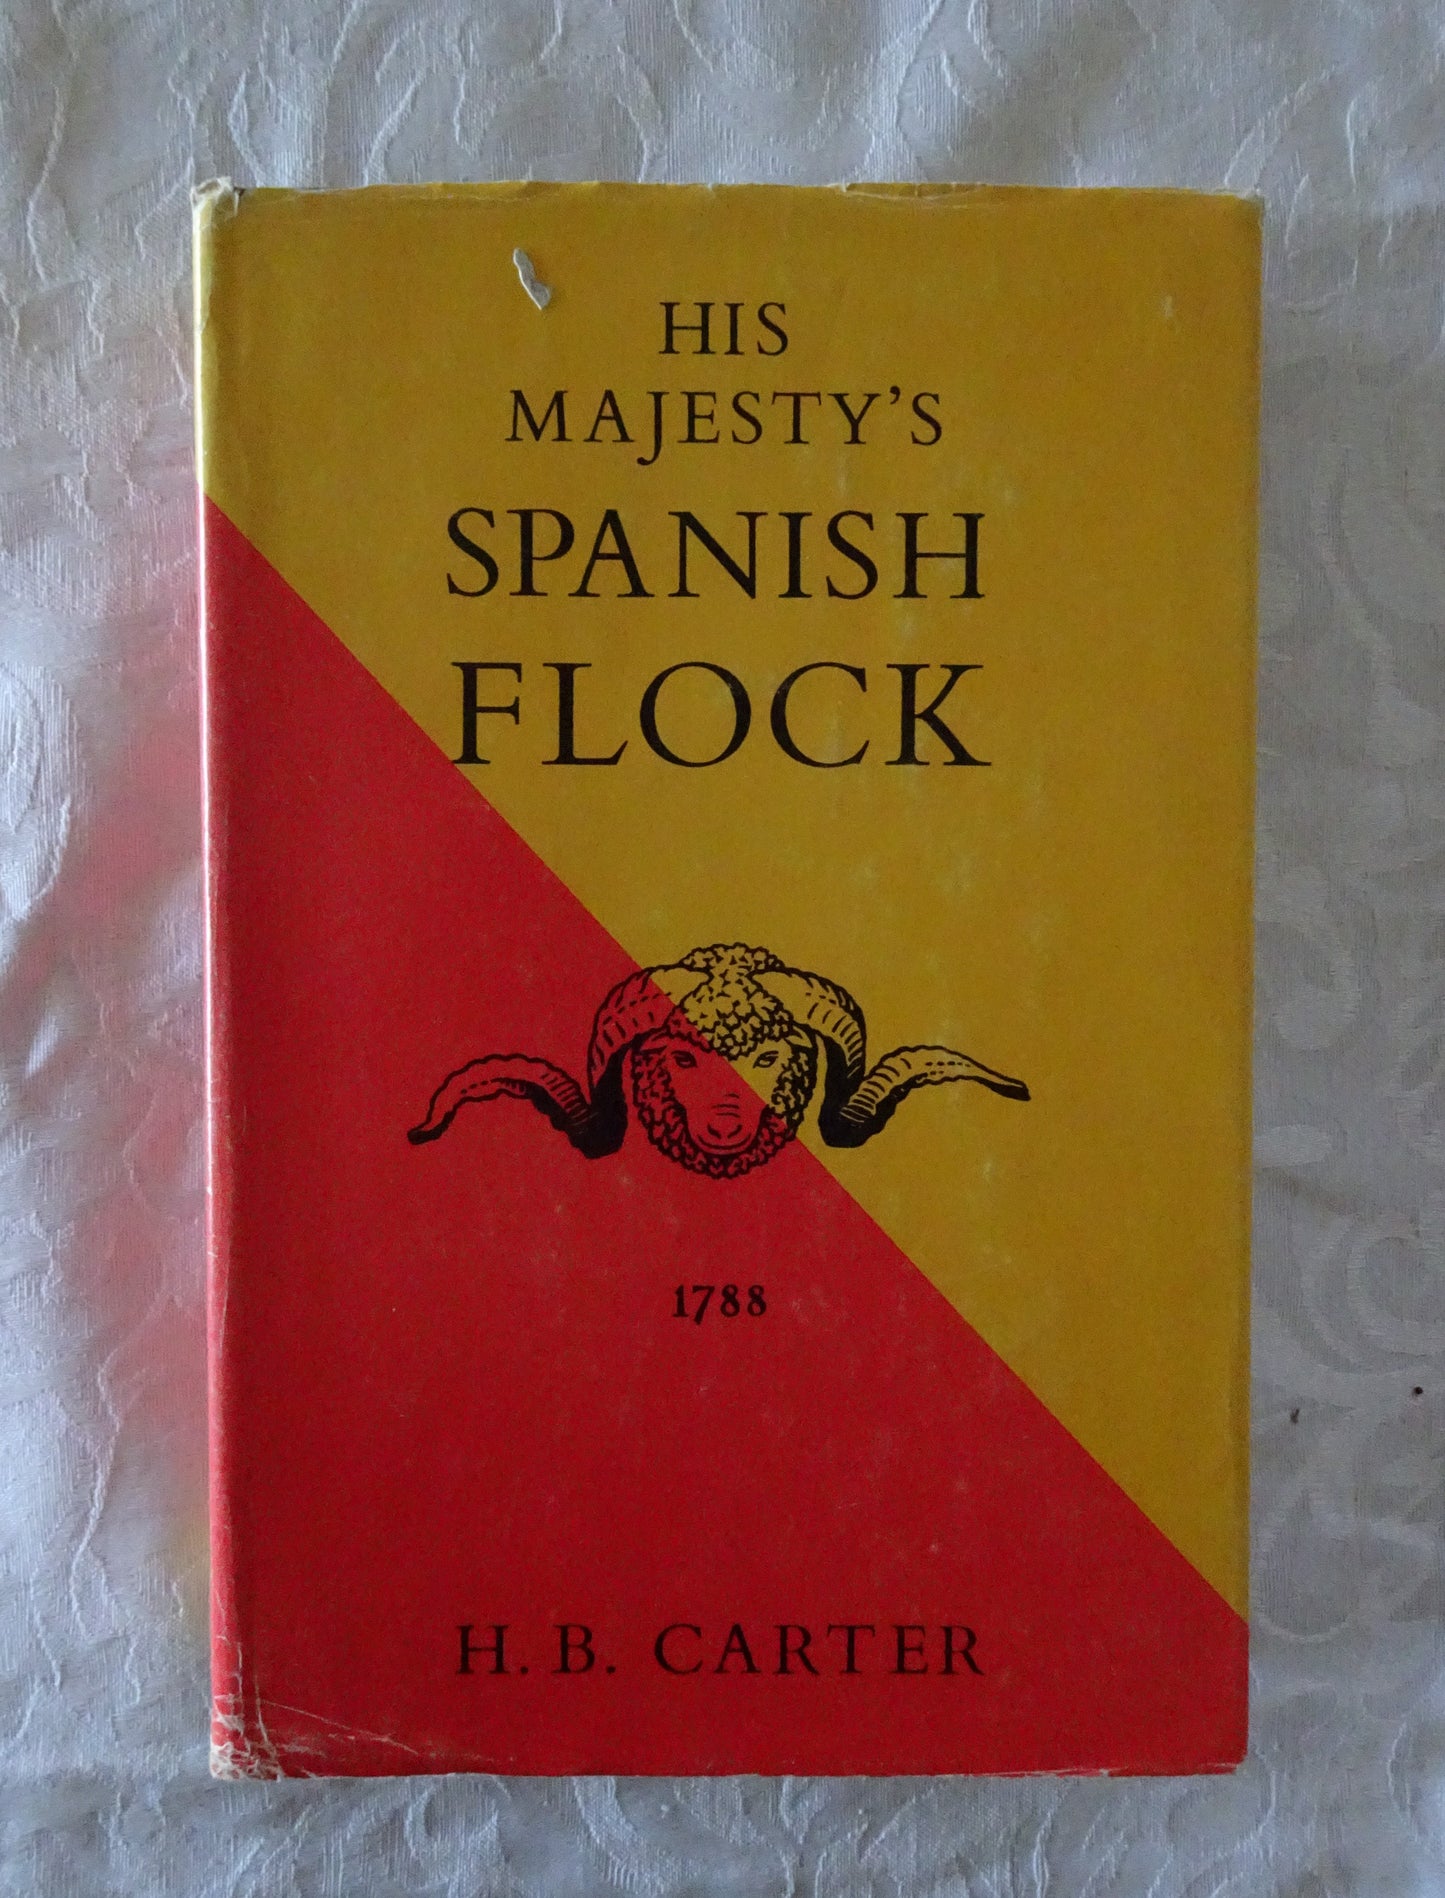 His Majesty's Spanish Flock by H. B. Carter